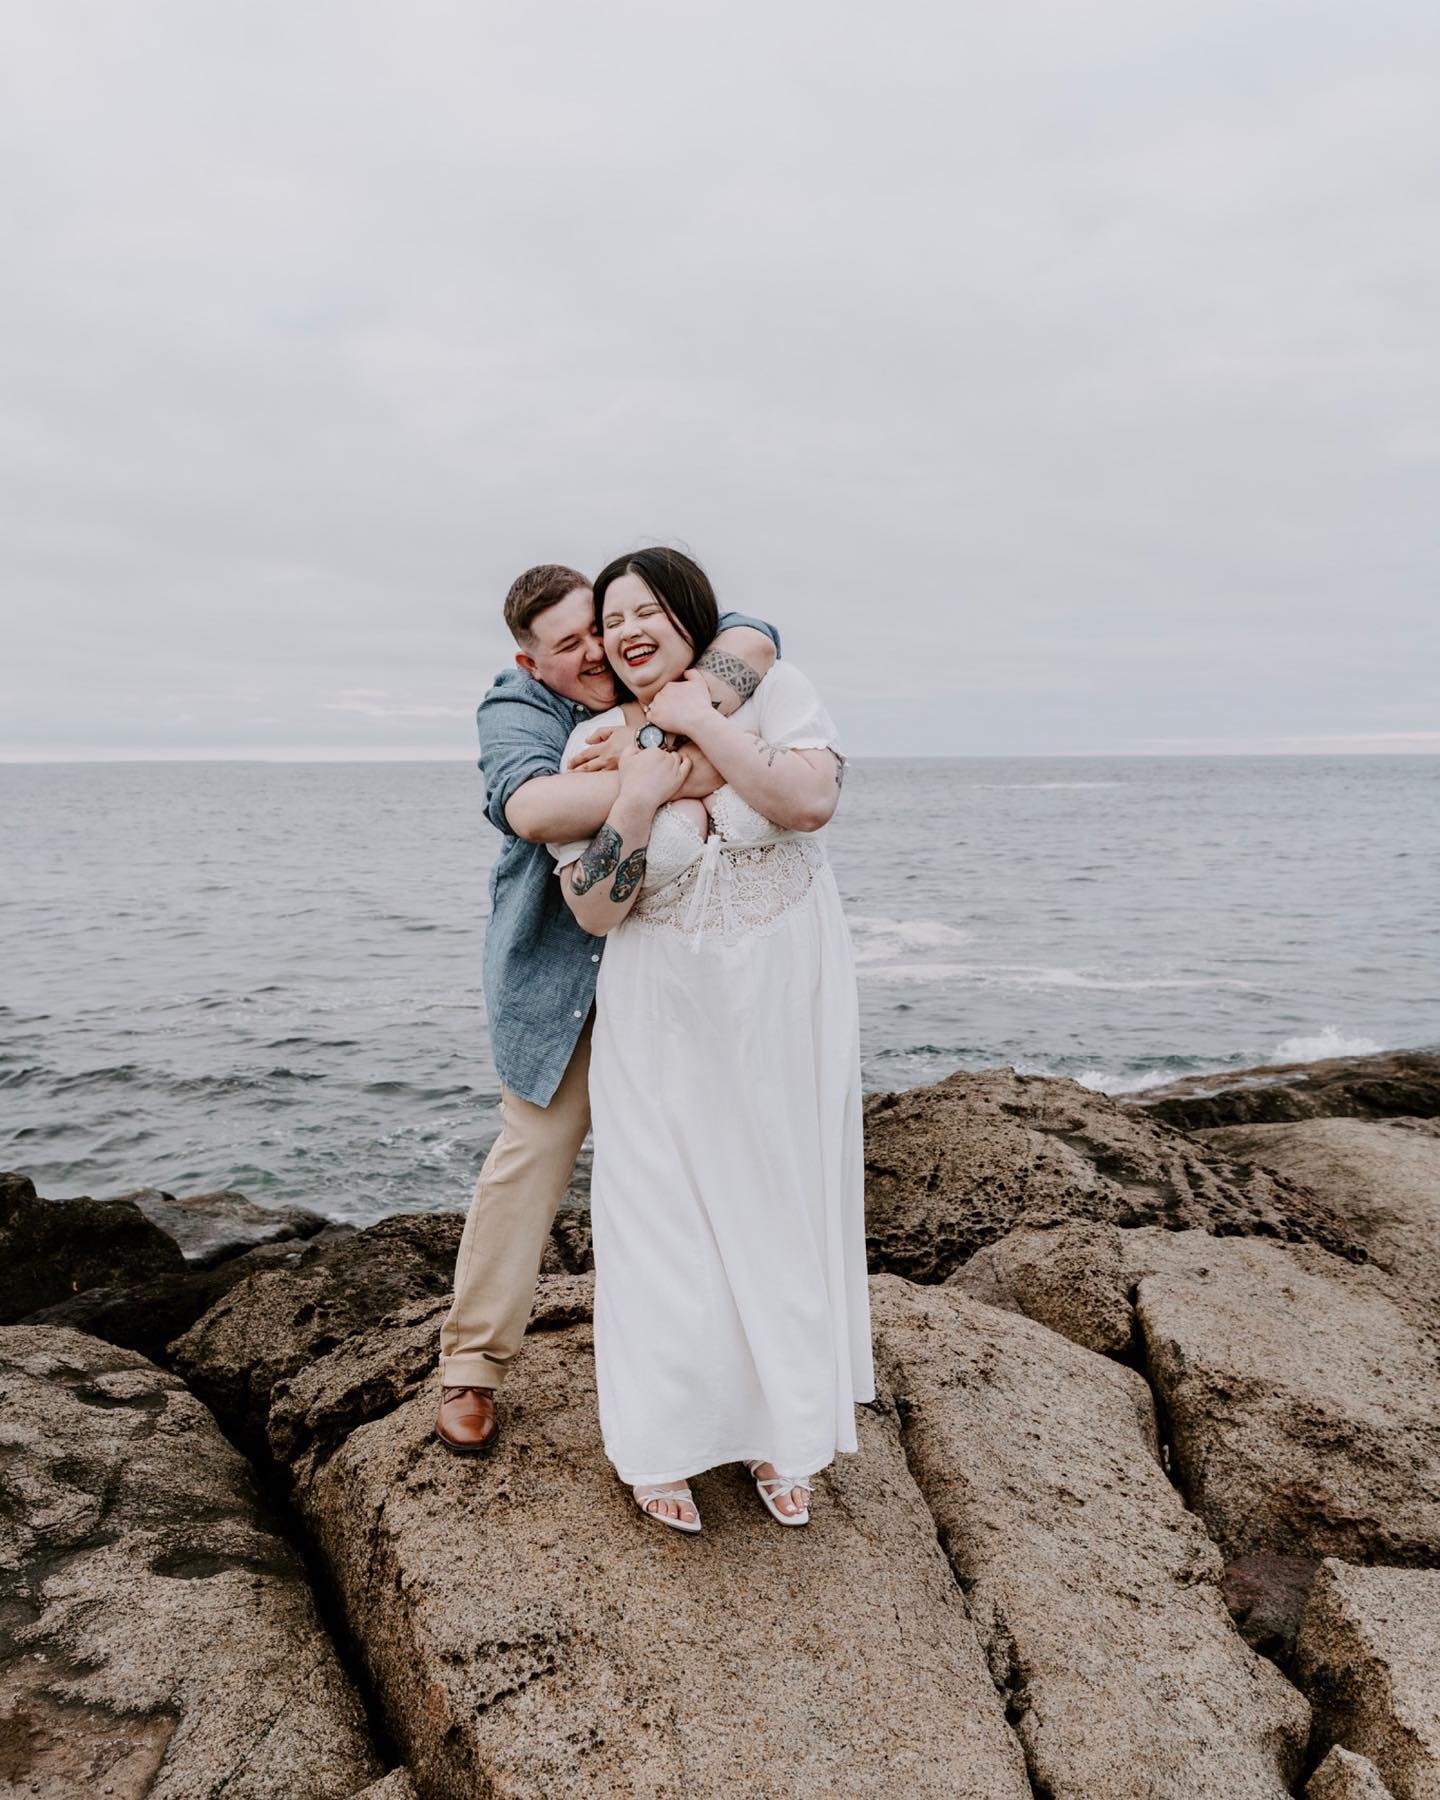 Is there a time of year which Maine isn&rsquo;t breathtaking? Never. 

#maine #mainewedding #engaged #lbgtq #lgbtqwedding #loveislove #maineproposal #mainetheway #adventureelopement #visitmaine 

Maine Couples, Maine Weddings, Maine Wedding Photograp